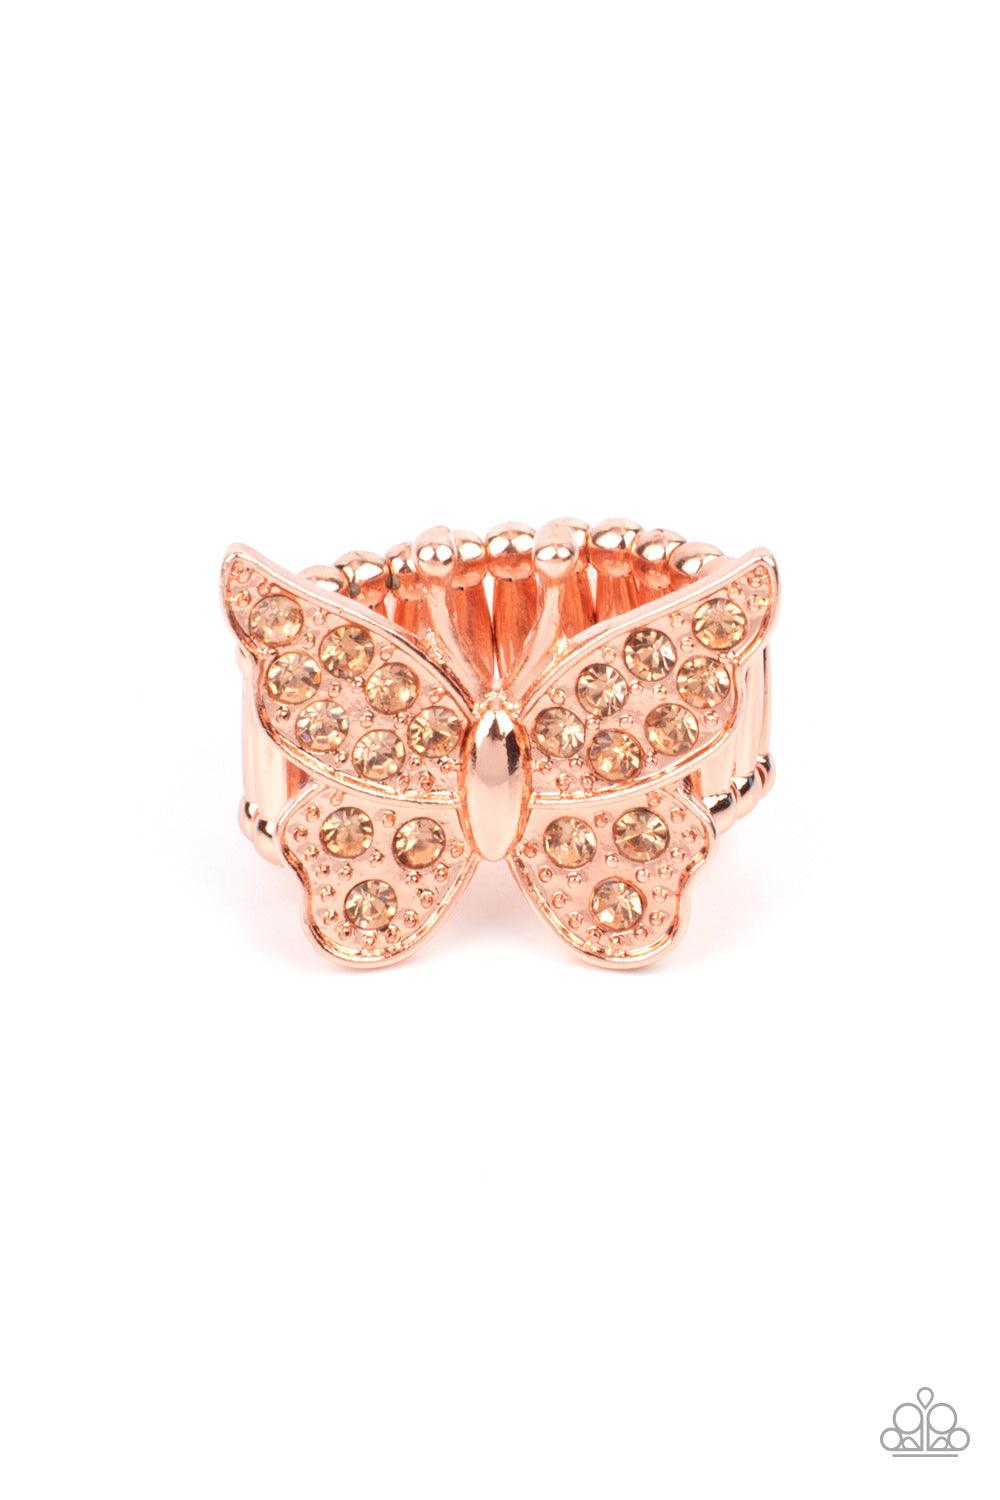 Paparazzi Accessories Bona Fide Butterfly - Copper Encrusted in sparkly rhinestones, a shiny copper butterfly flutters atop the finger for an enchanting fashion. Features a stretchy band for a flexible fit. Sold as one individual ring. Jewelry